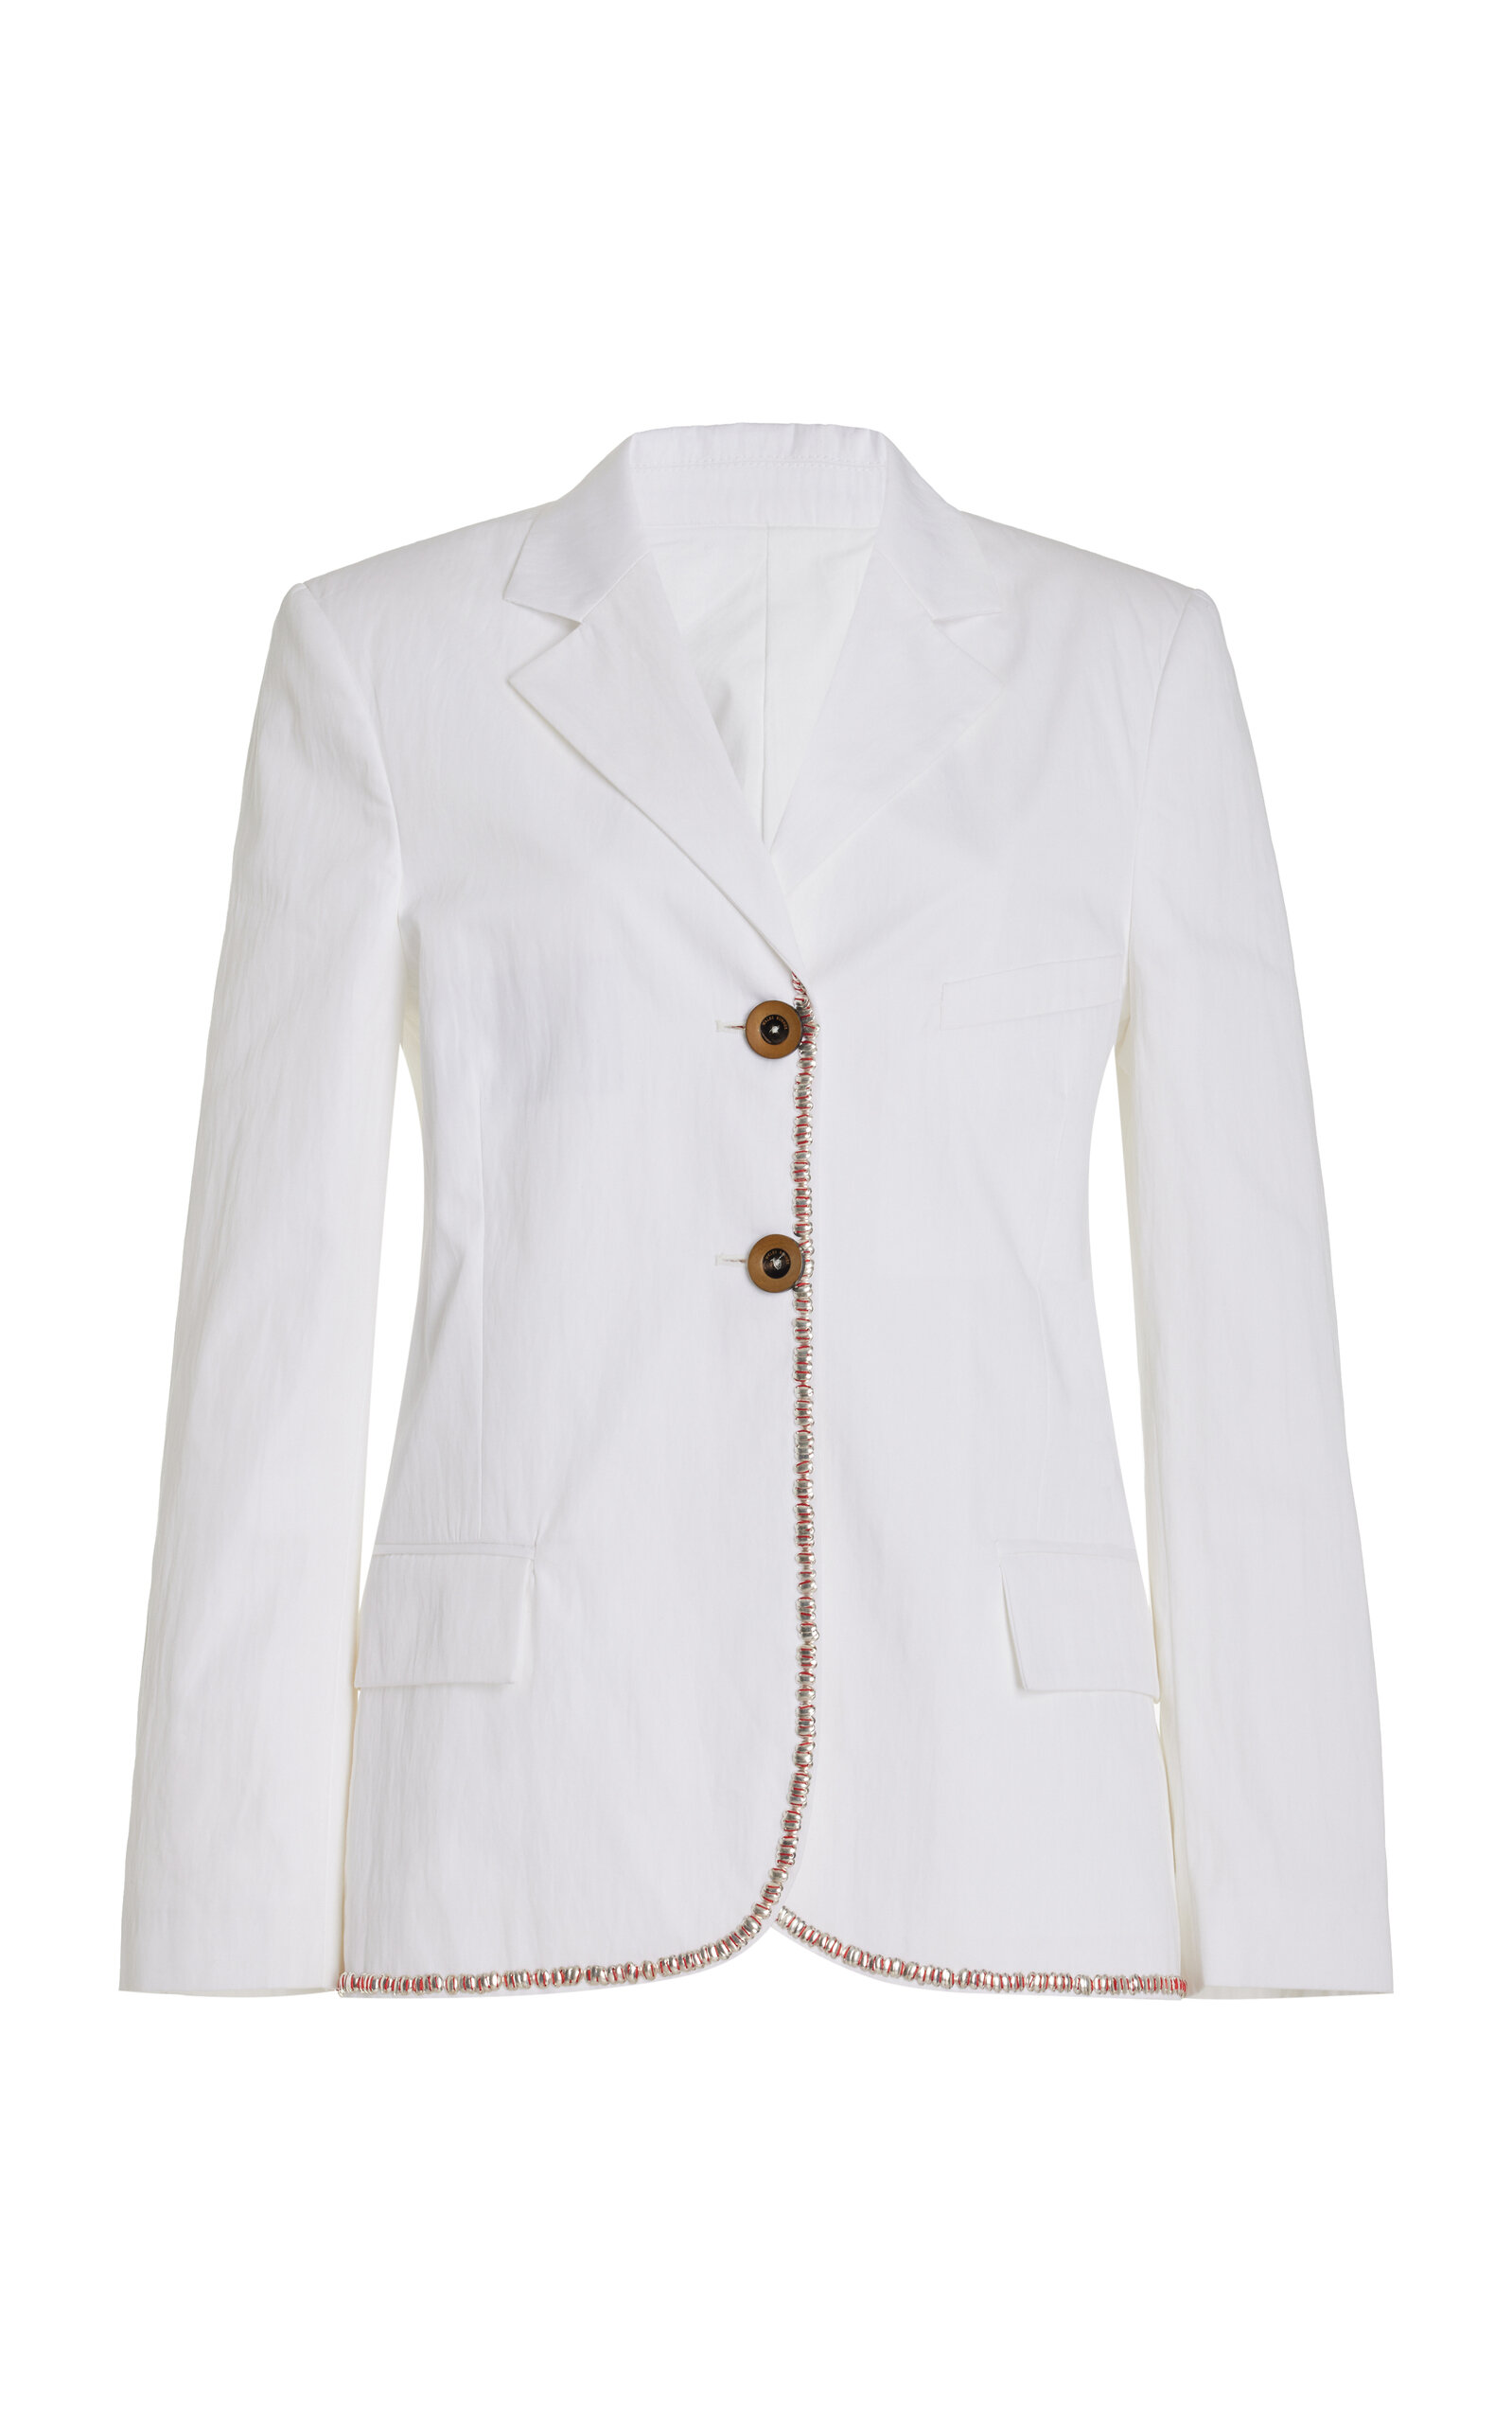 Wales Bonner Truth Embellished Technical Cotton Blazer In White